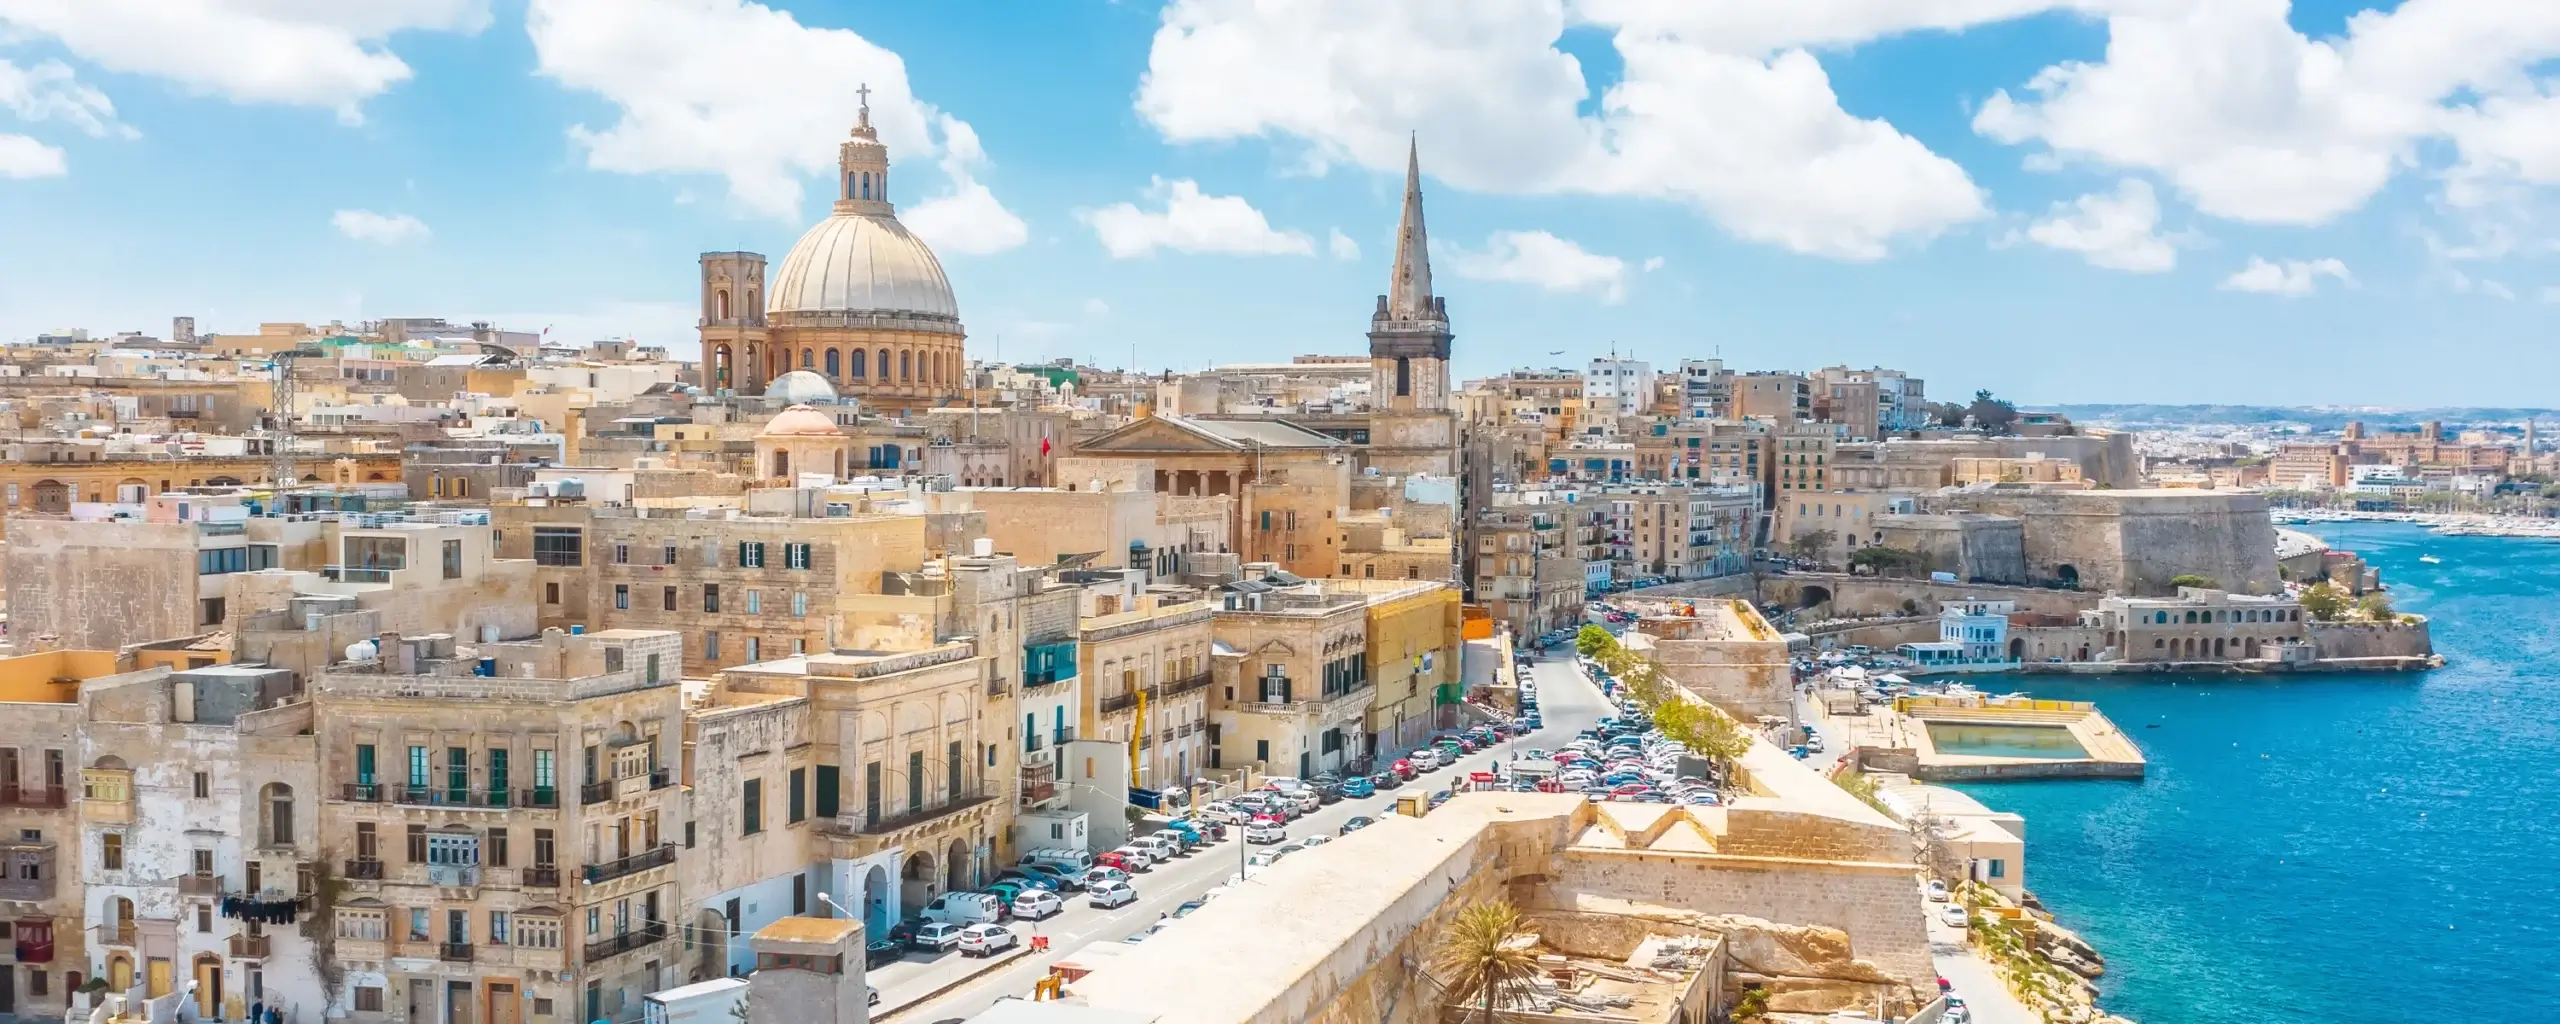 Malta Citizenship By Investment